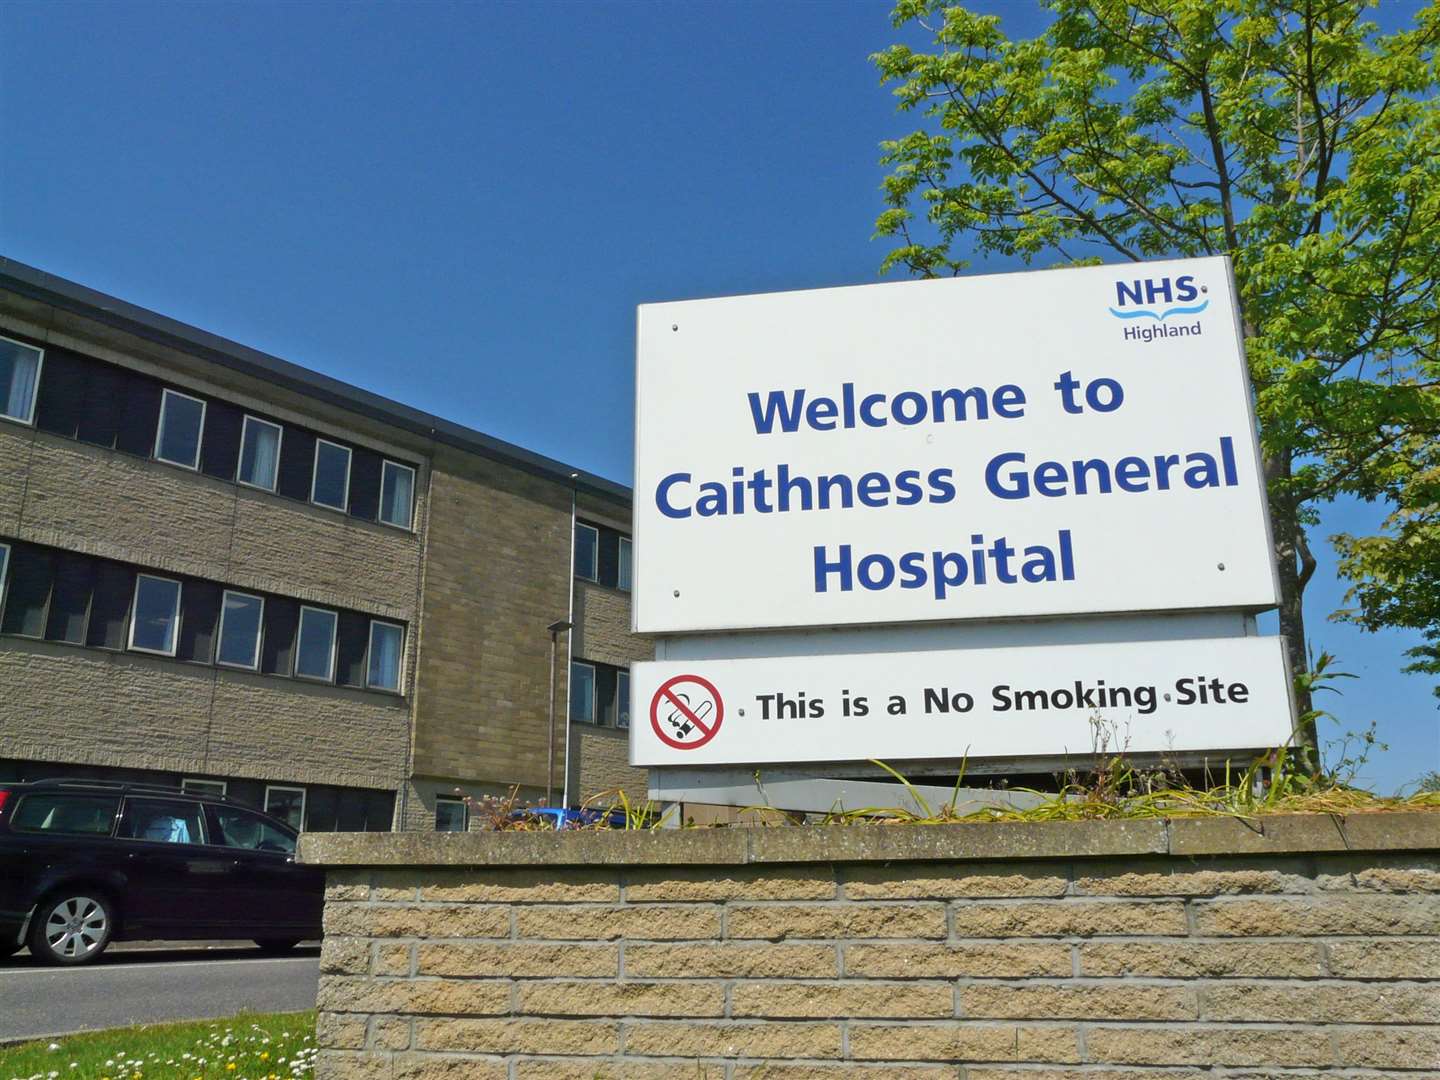 The health board’s Welcome / Failte Initiative will apply to all its hospitals, including Caithness General Hospital in Wick.